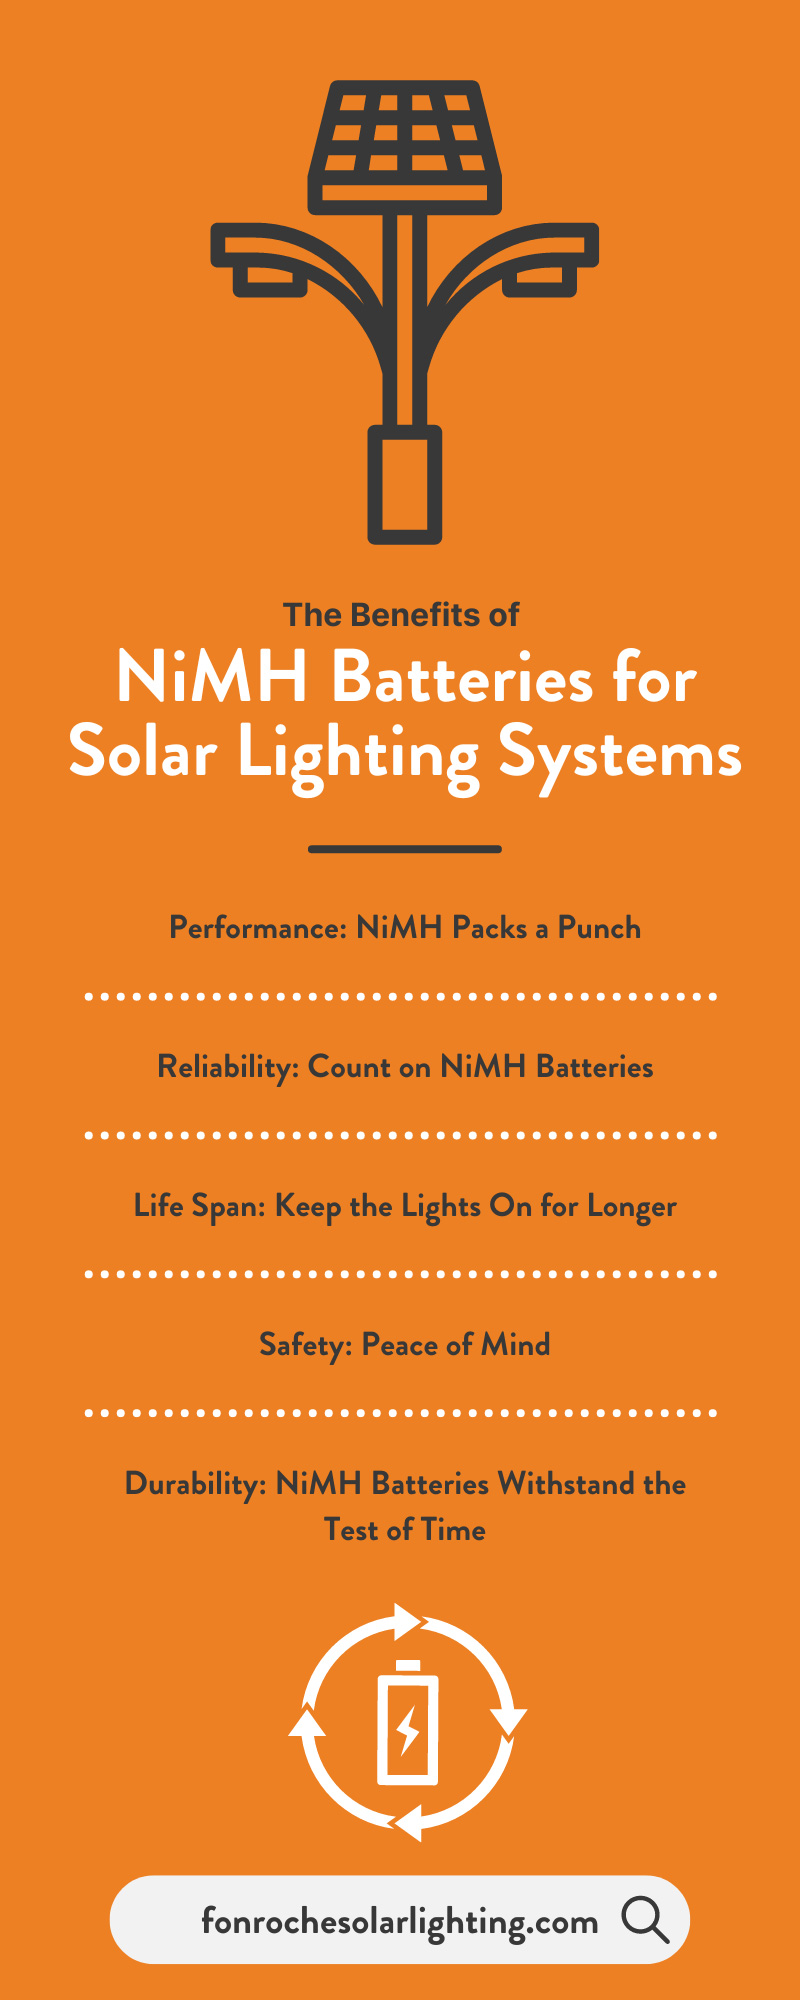 The Benefits of NiMH Batteries for Solar Lighting Systems